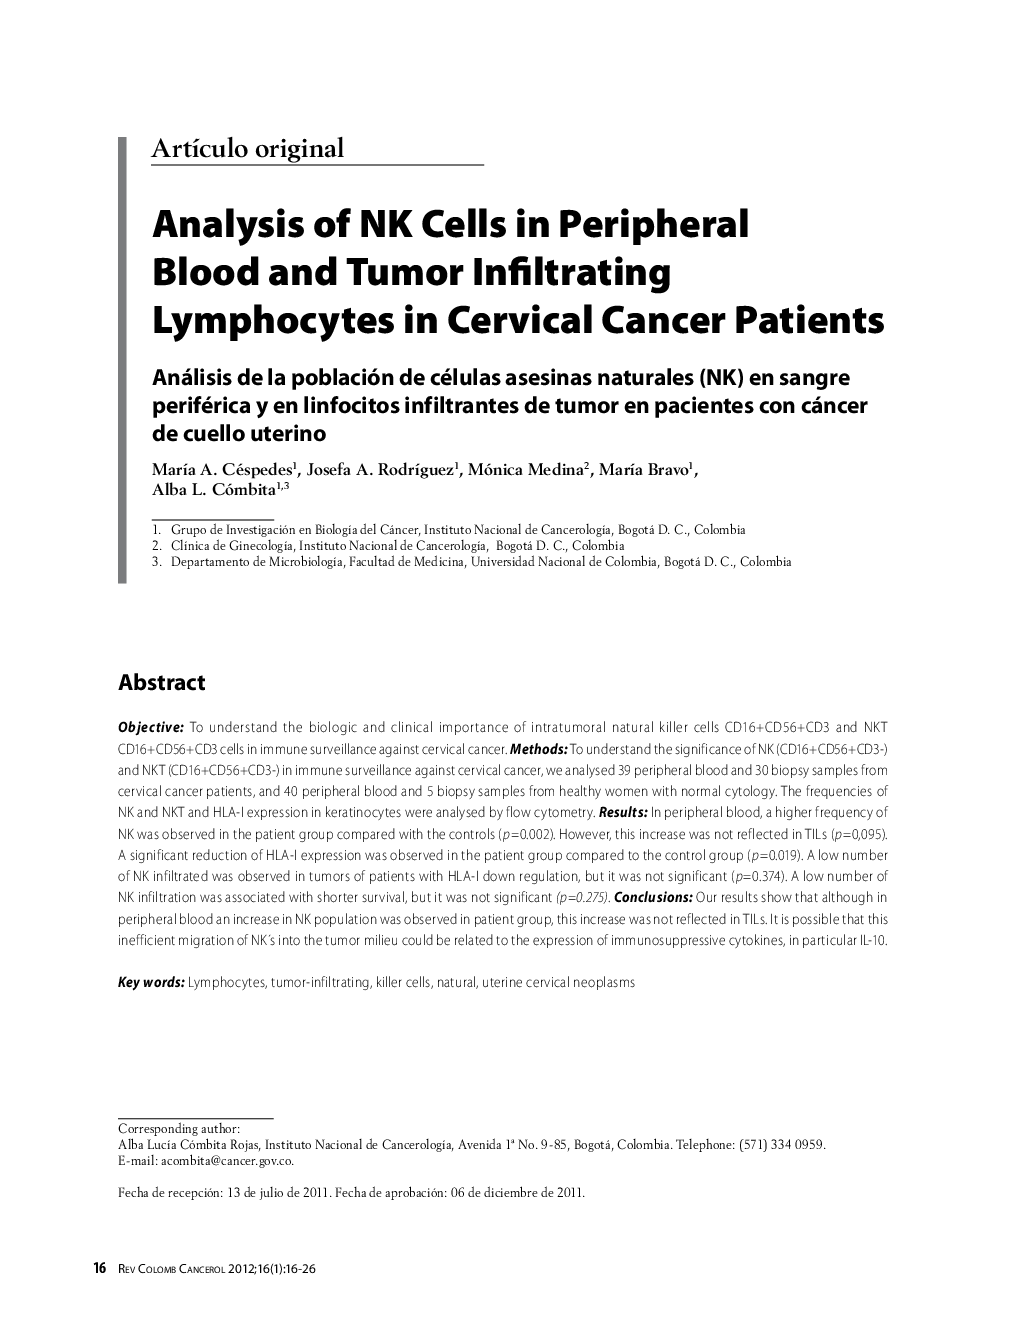 Analysis of NK Cells in Peripheral Blood and Tumor Infiltrating Lymphocytes in Cervical Cancer Patients